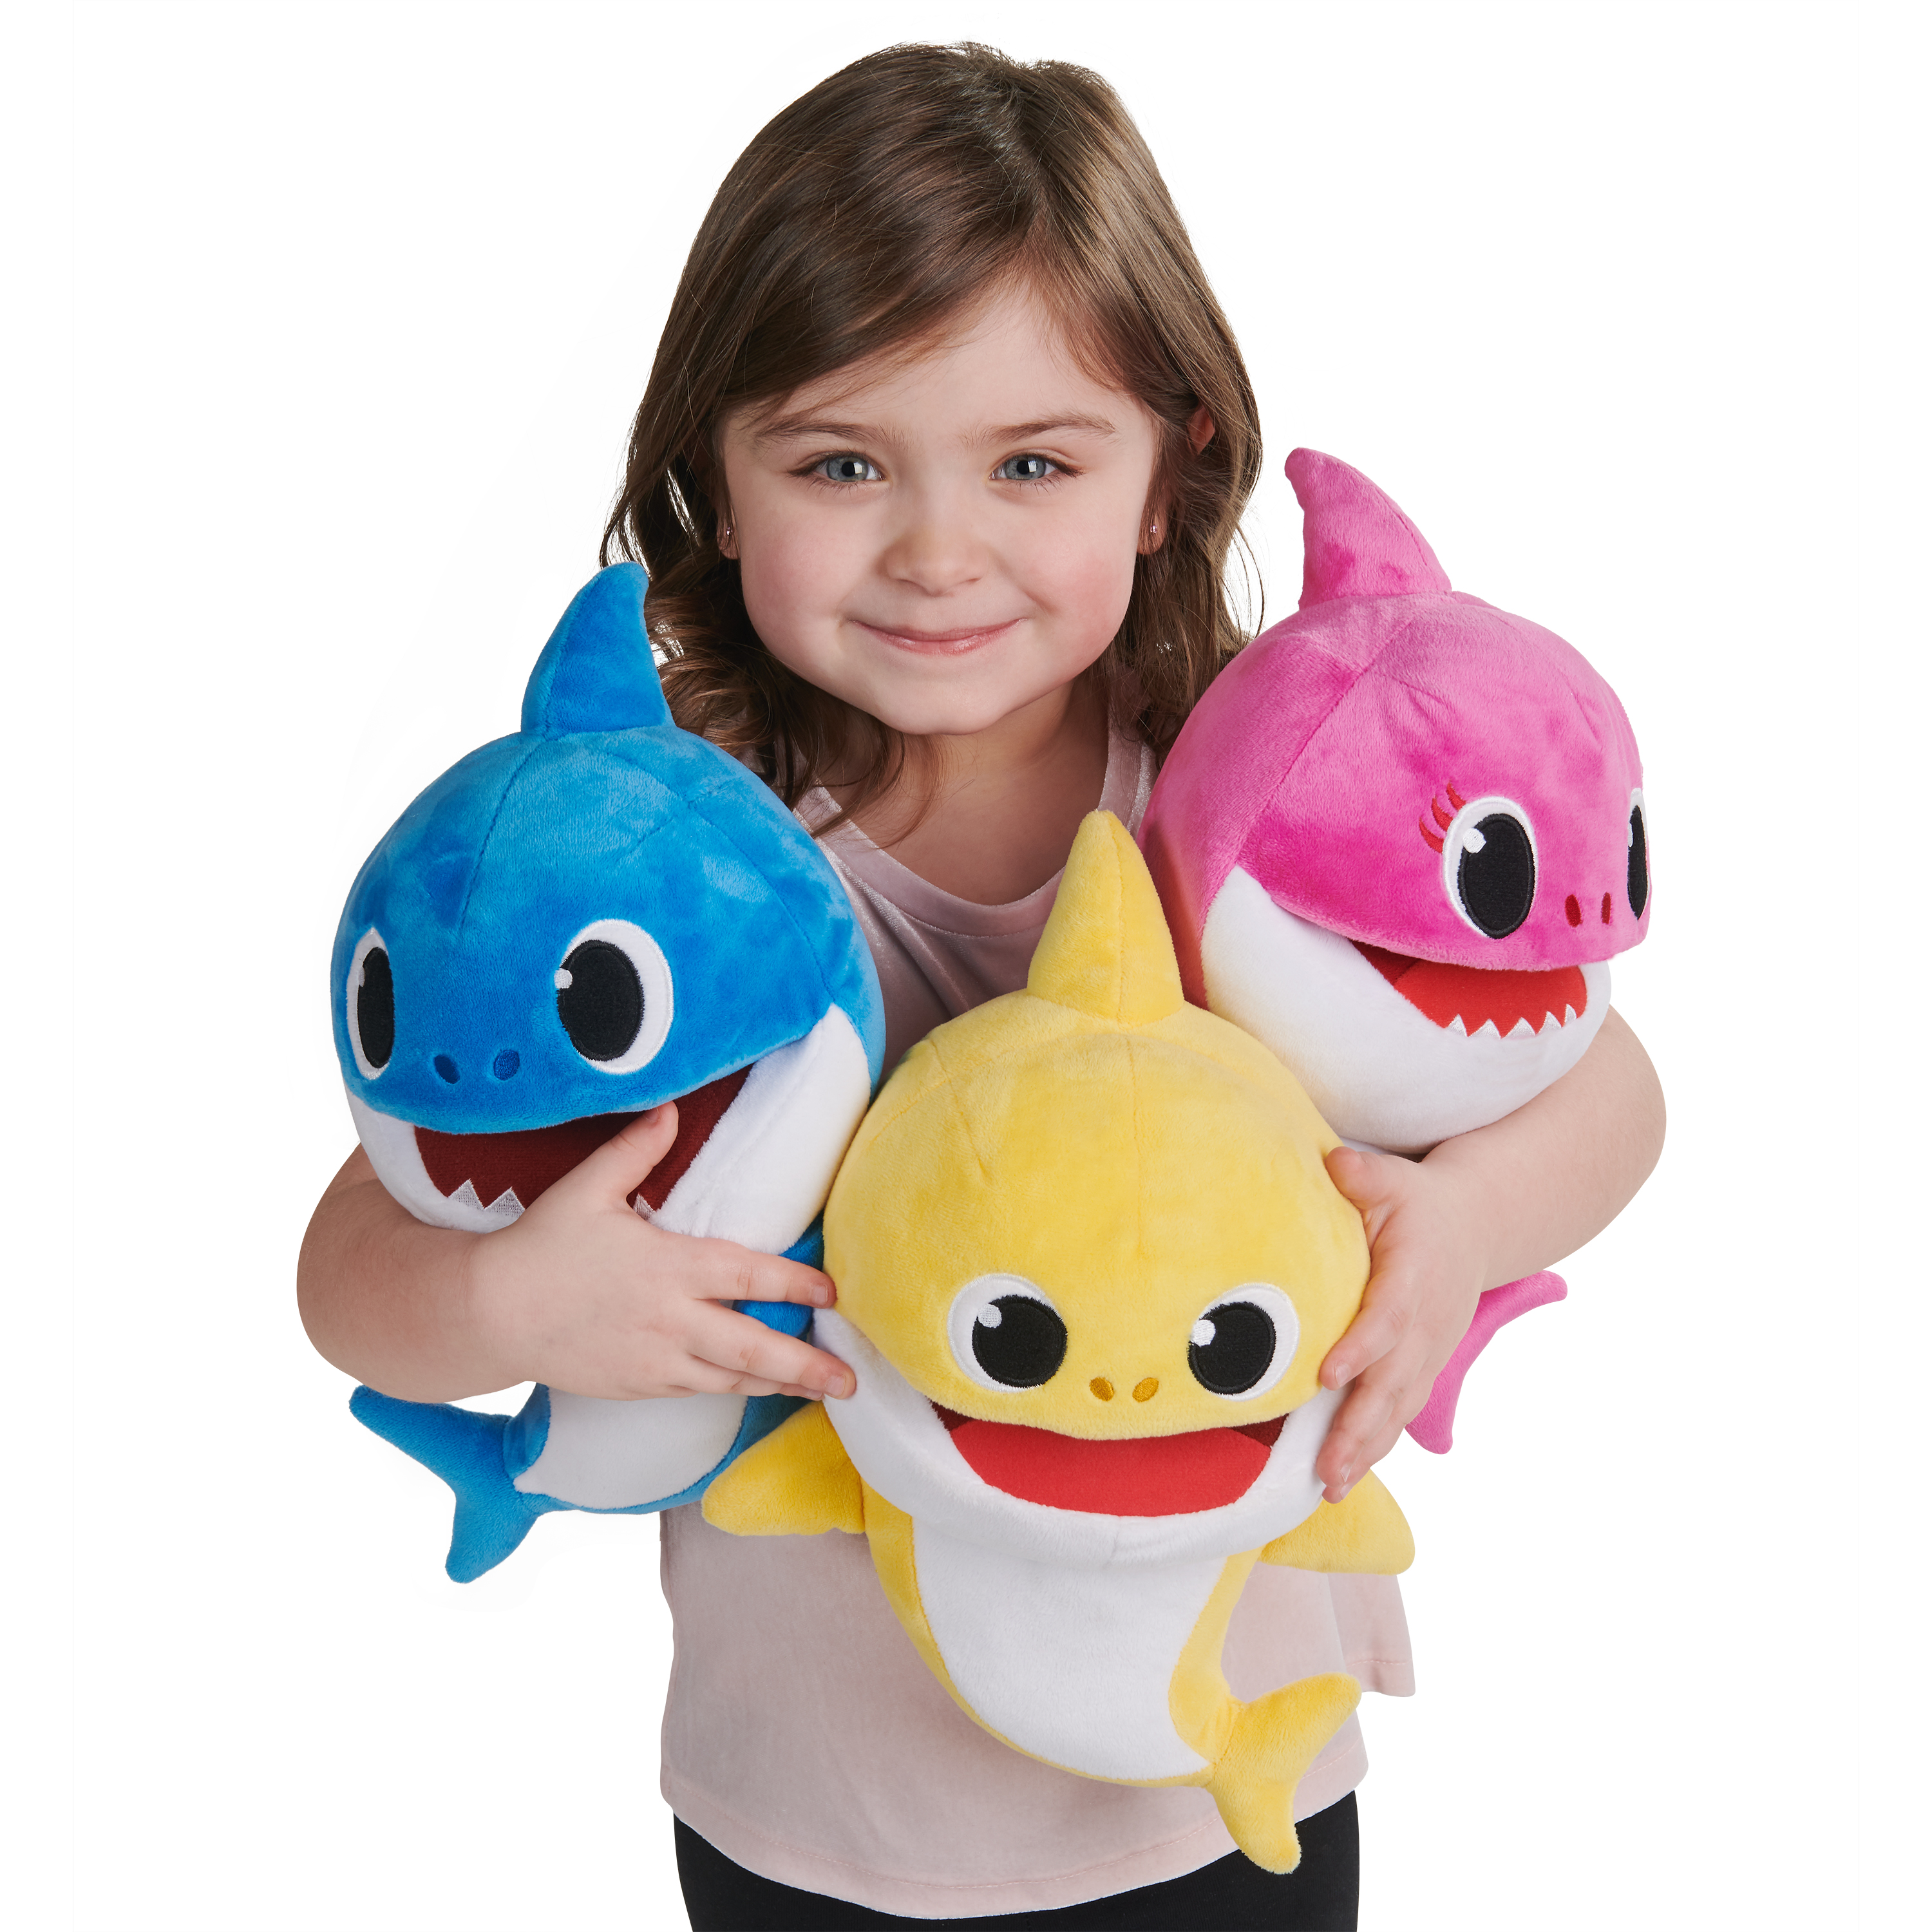 Pinkfong Baby Shark OfficialSong Puppet with Tempo Control - Daddy Shark - Interactive Preschool Plush Toy - By WowWee - image 3 of 8